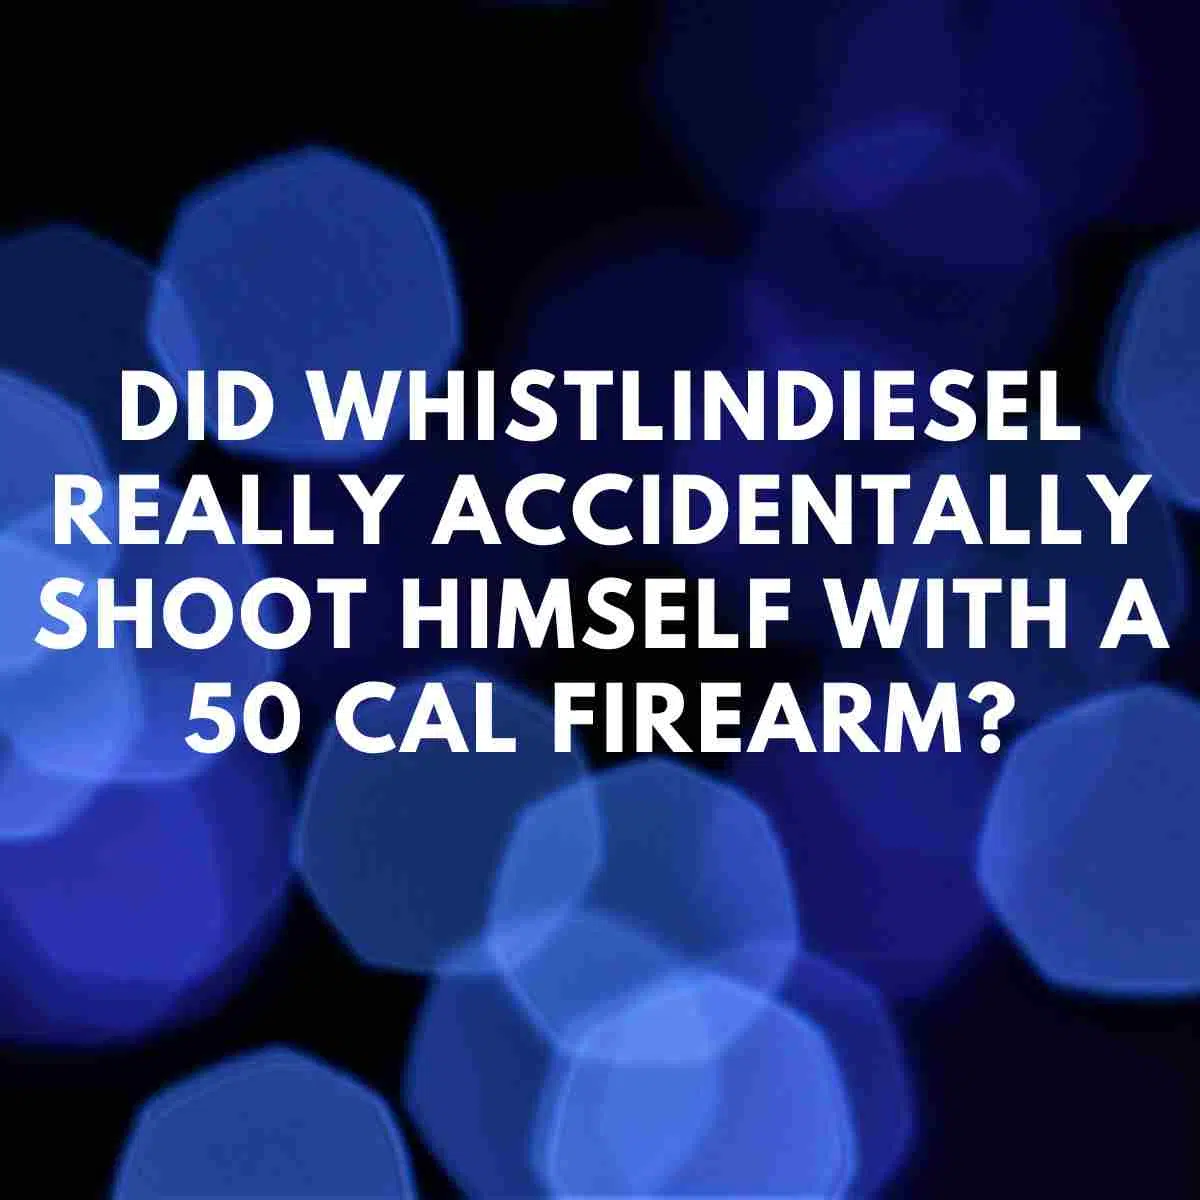 Did WhistlinDiesel really accidentally shoot himself with a 50 cal firearm